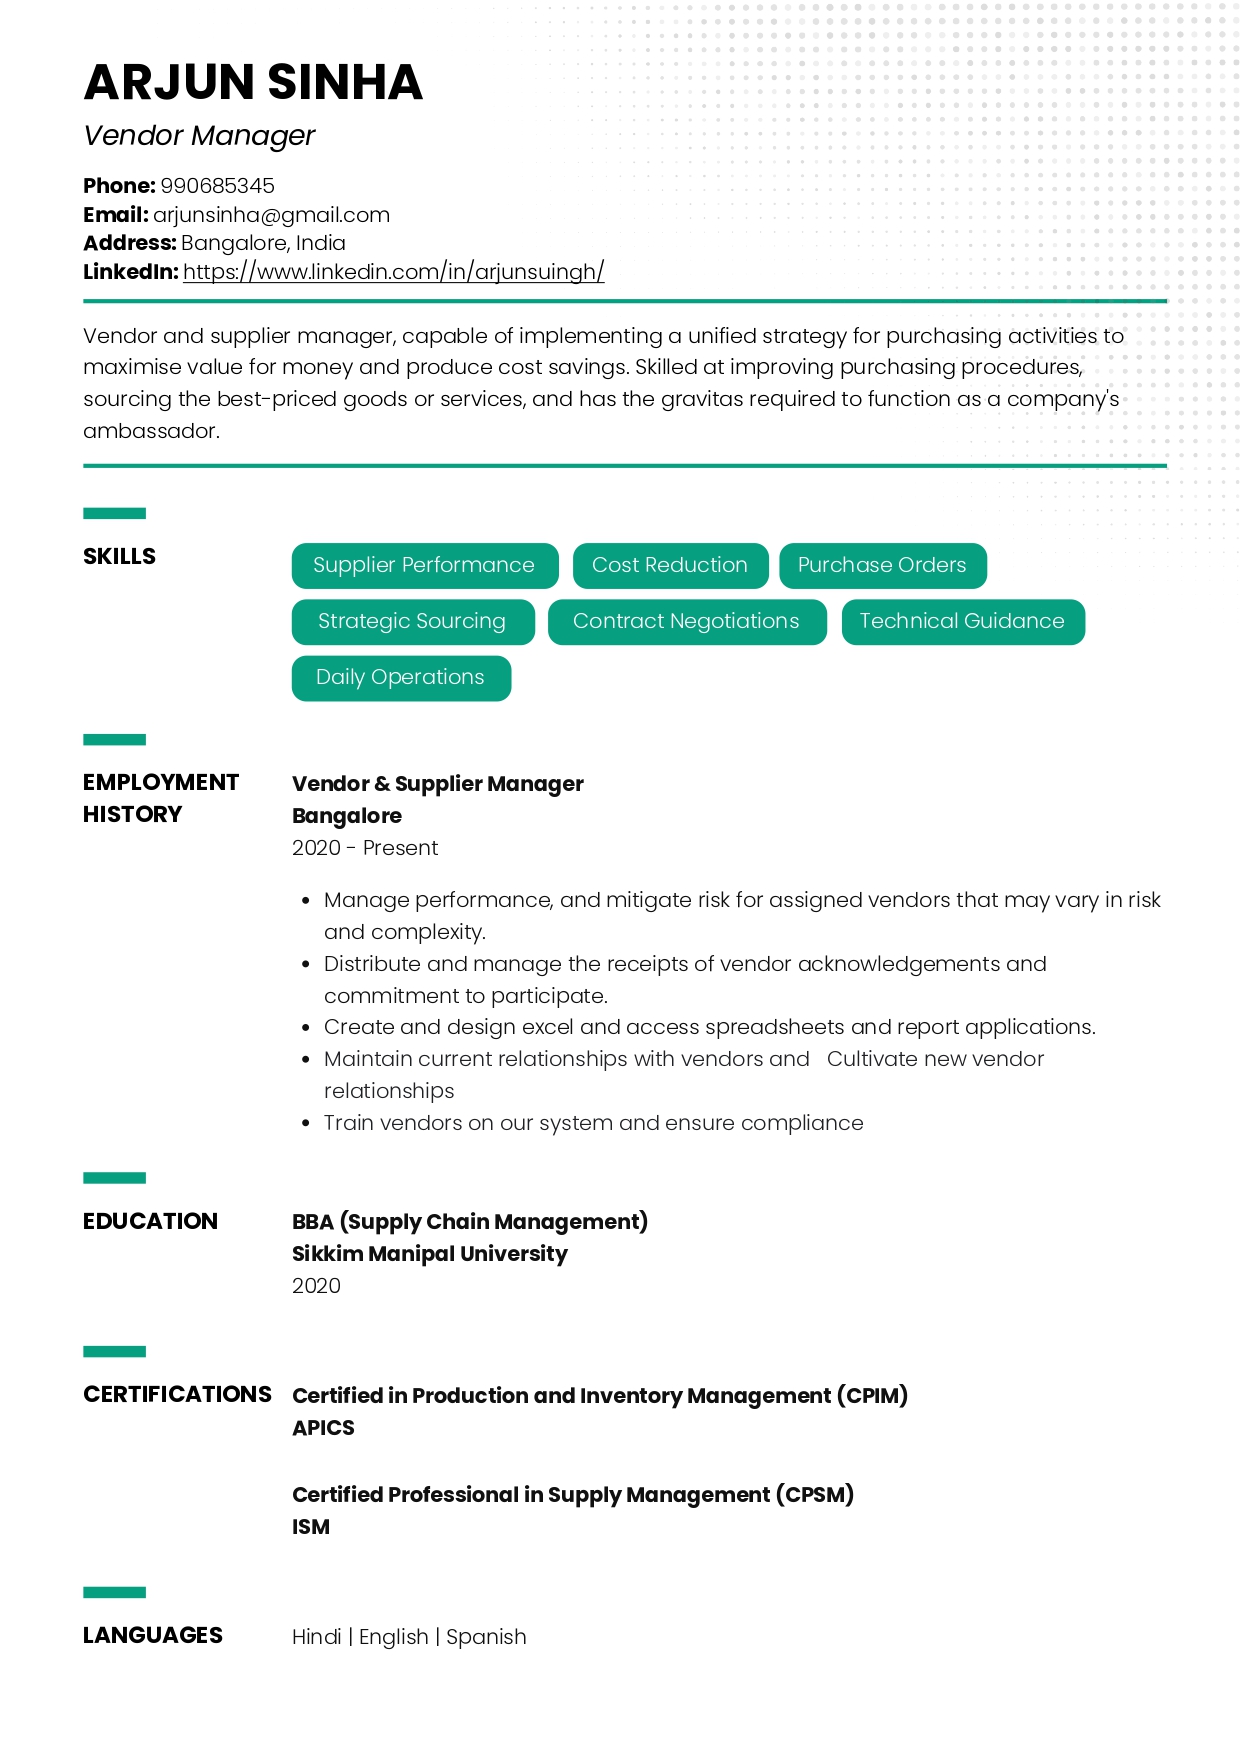 Sample Resume of Vendor Manager | Free Resume Templates & Samples on Resumod.co